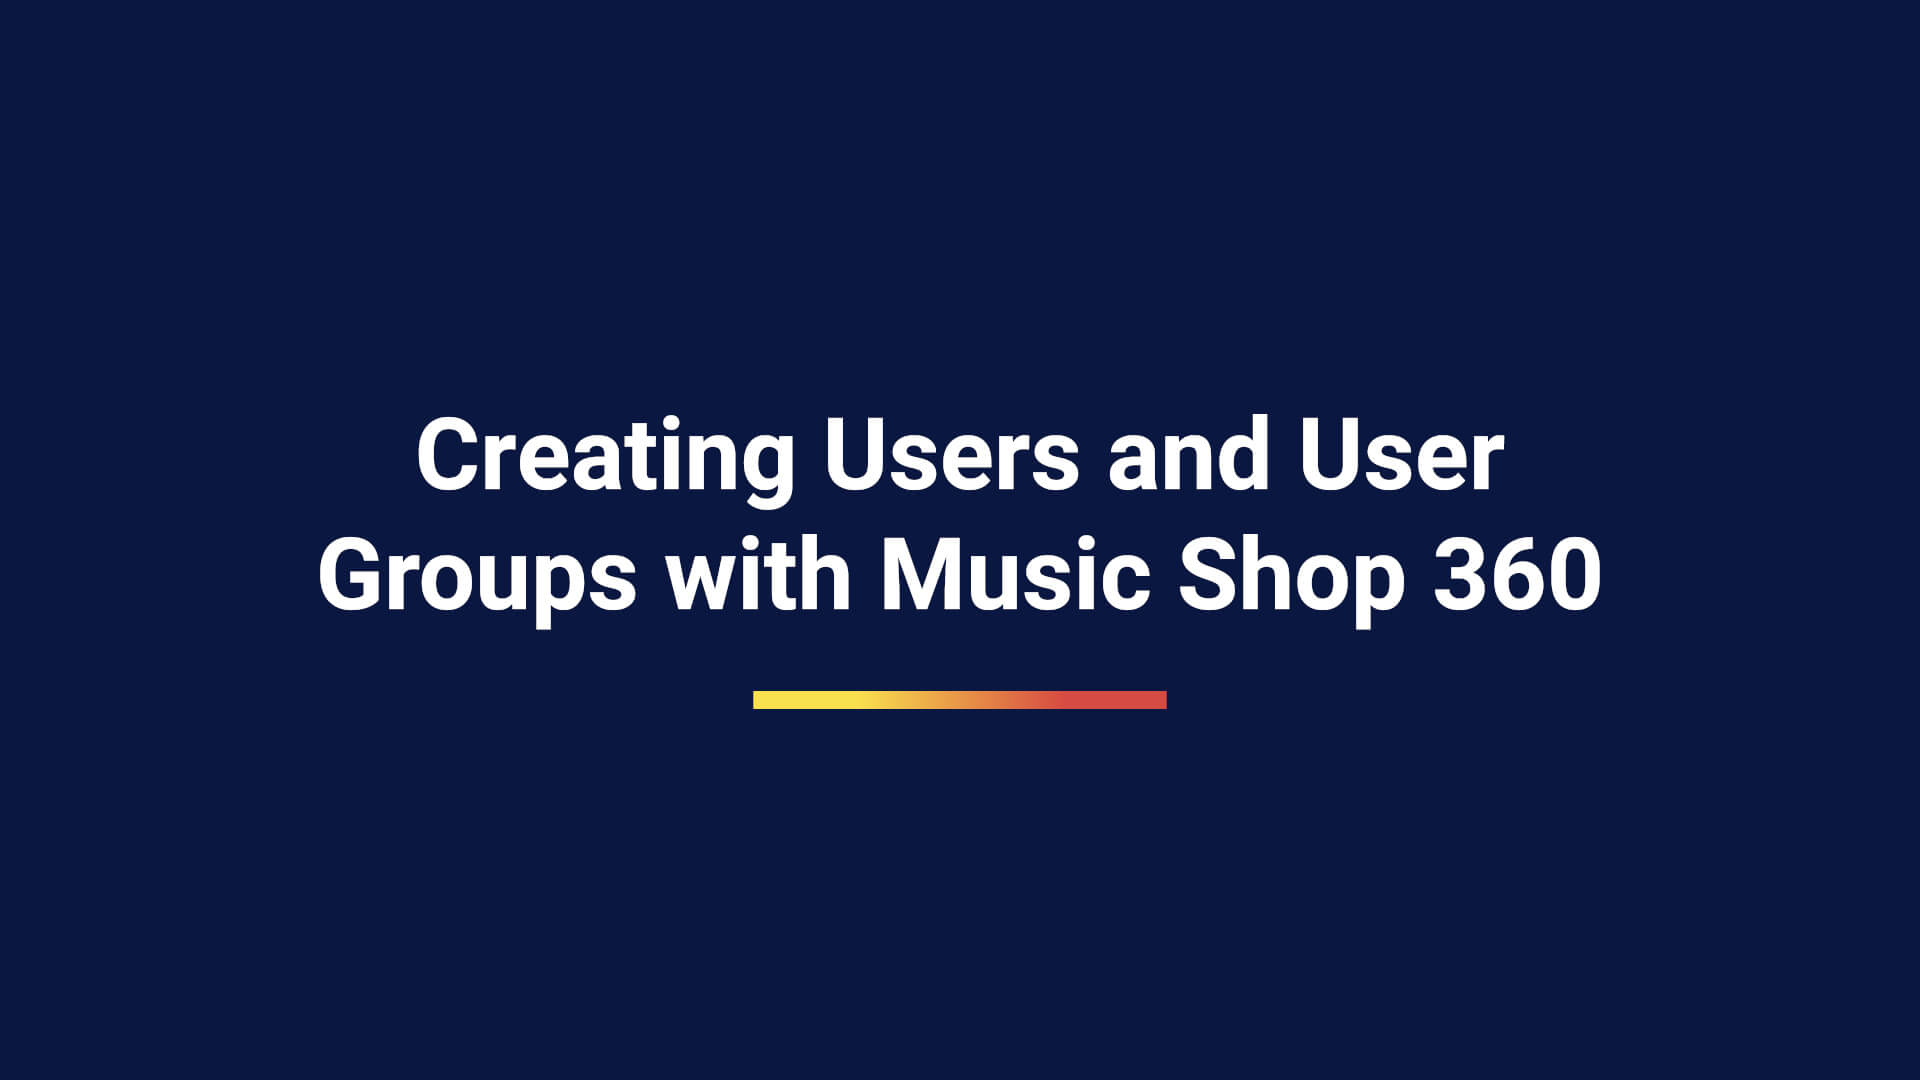 Creating Users and User Groups